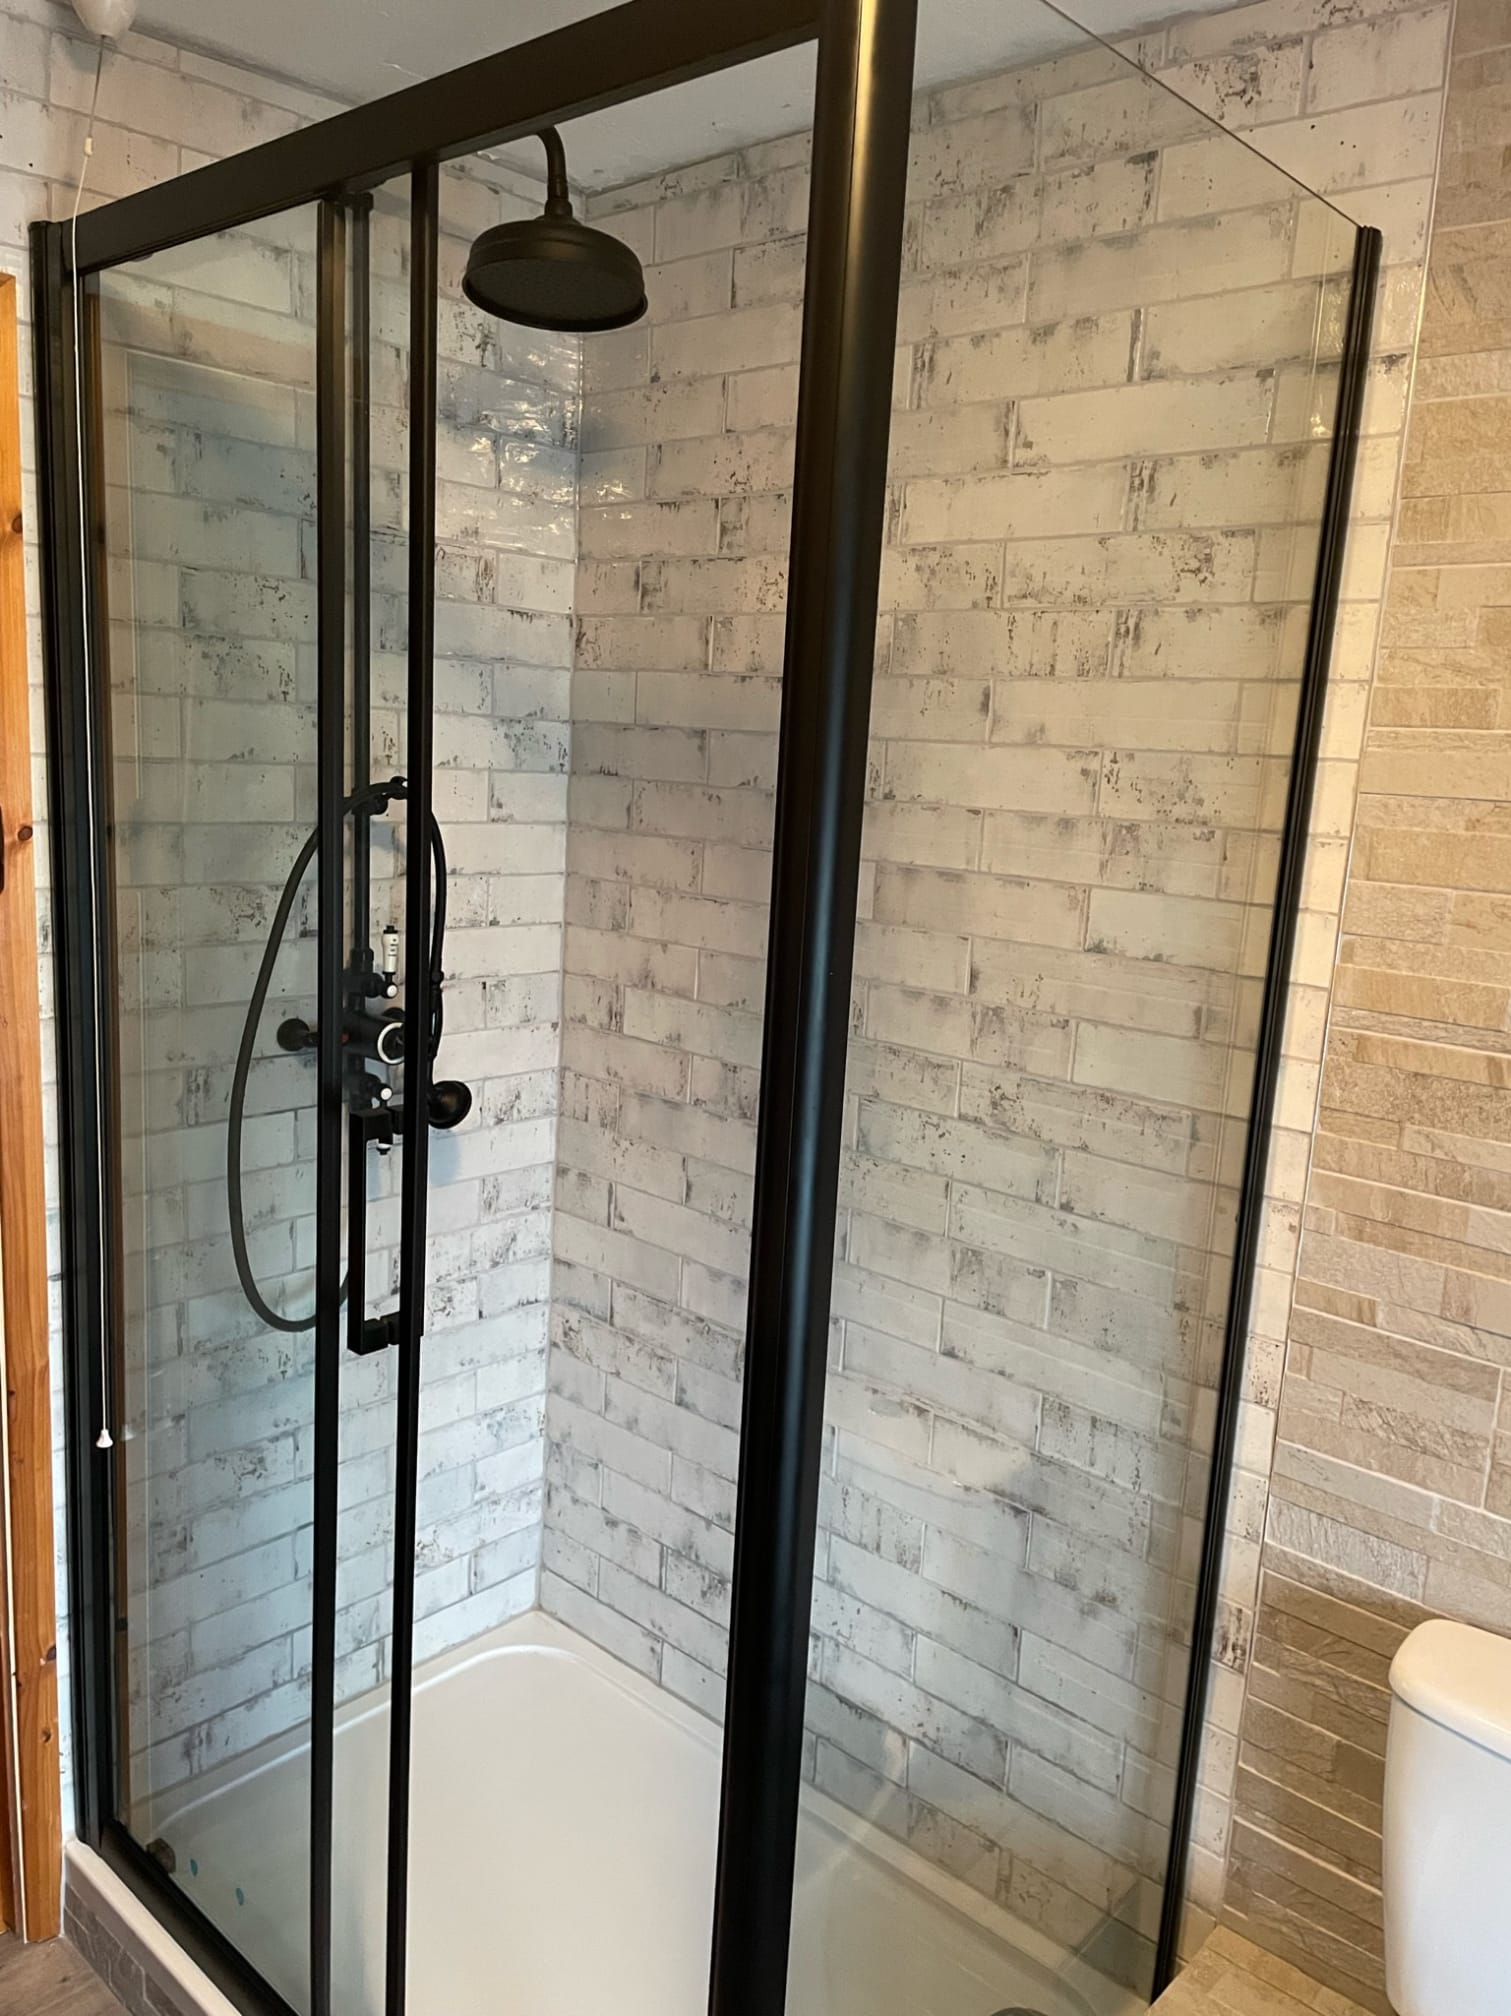 Images Chasewater Plumbing